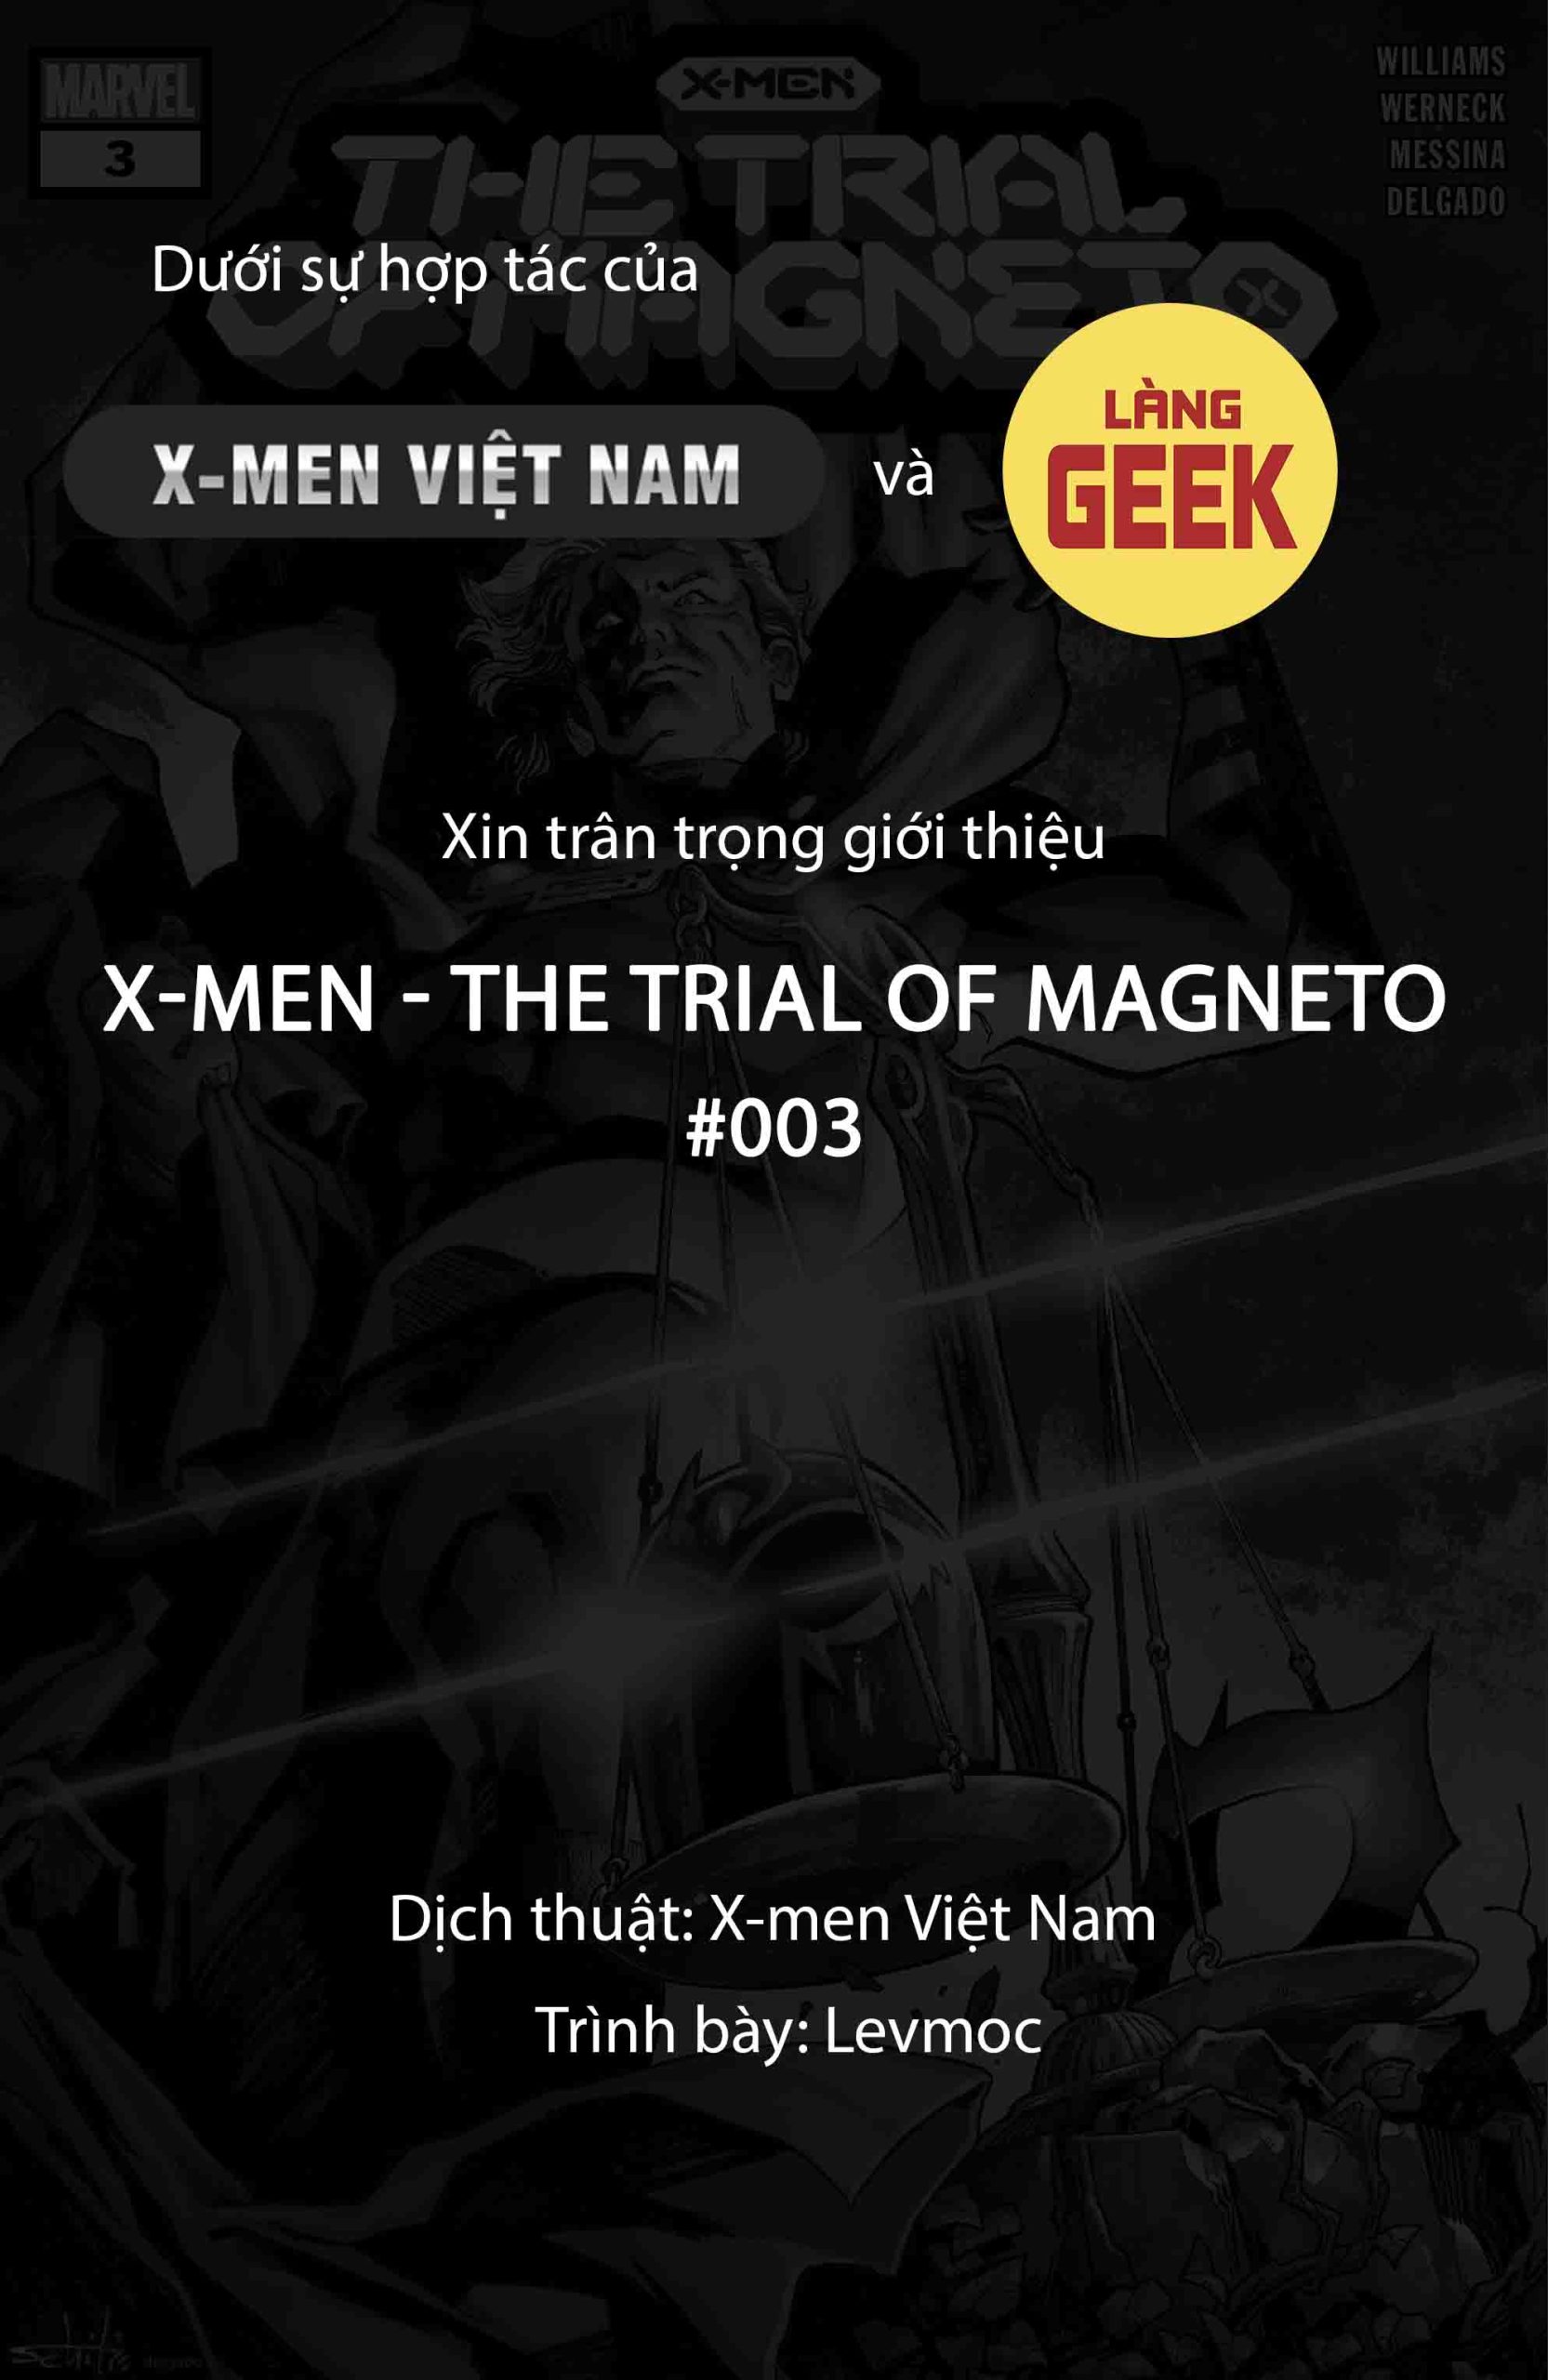 https://langgeek.net/wp-content/webpc-passthru.php?src=https://langgeek.net/wp-content/uploads/2022/03/X-Men-The-Trial-Of-Magneto-2021-03-of-05-000-1-scaled.jpg&nocache=1